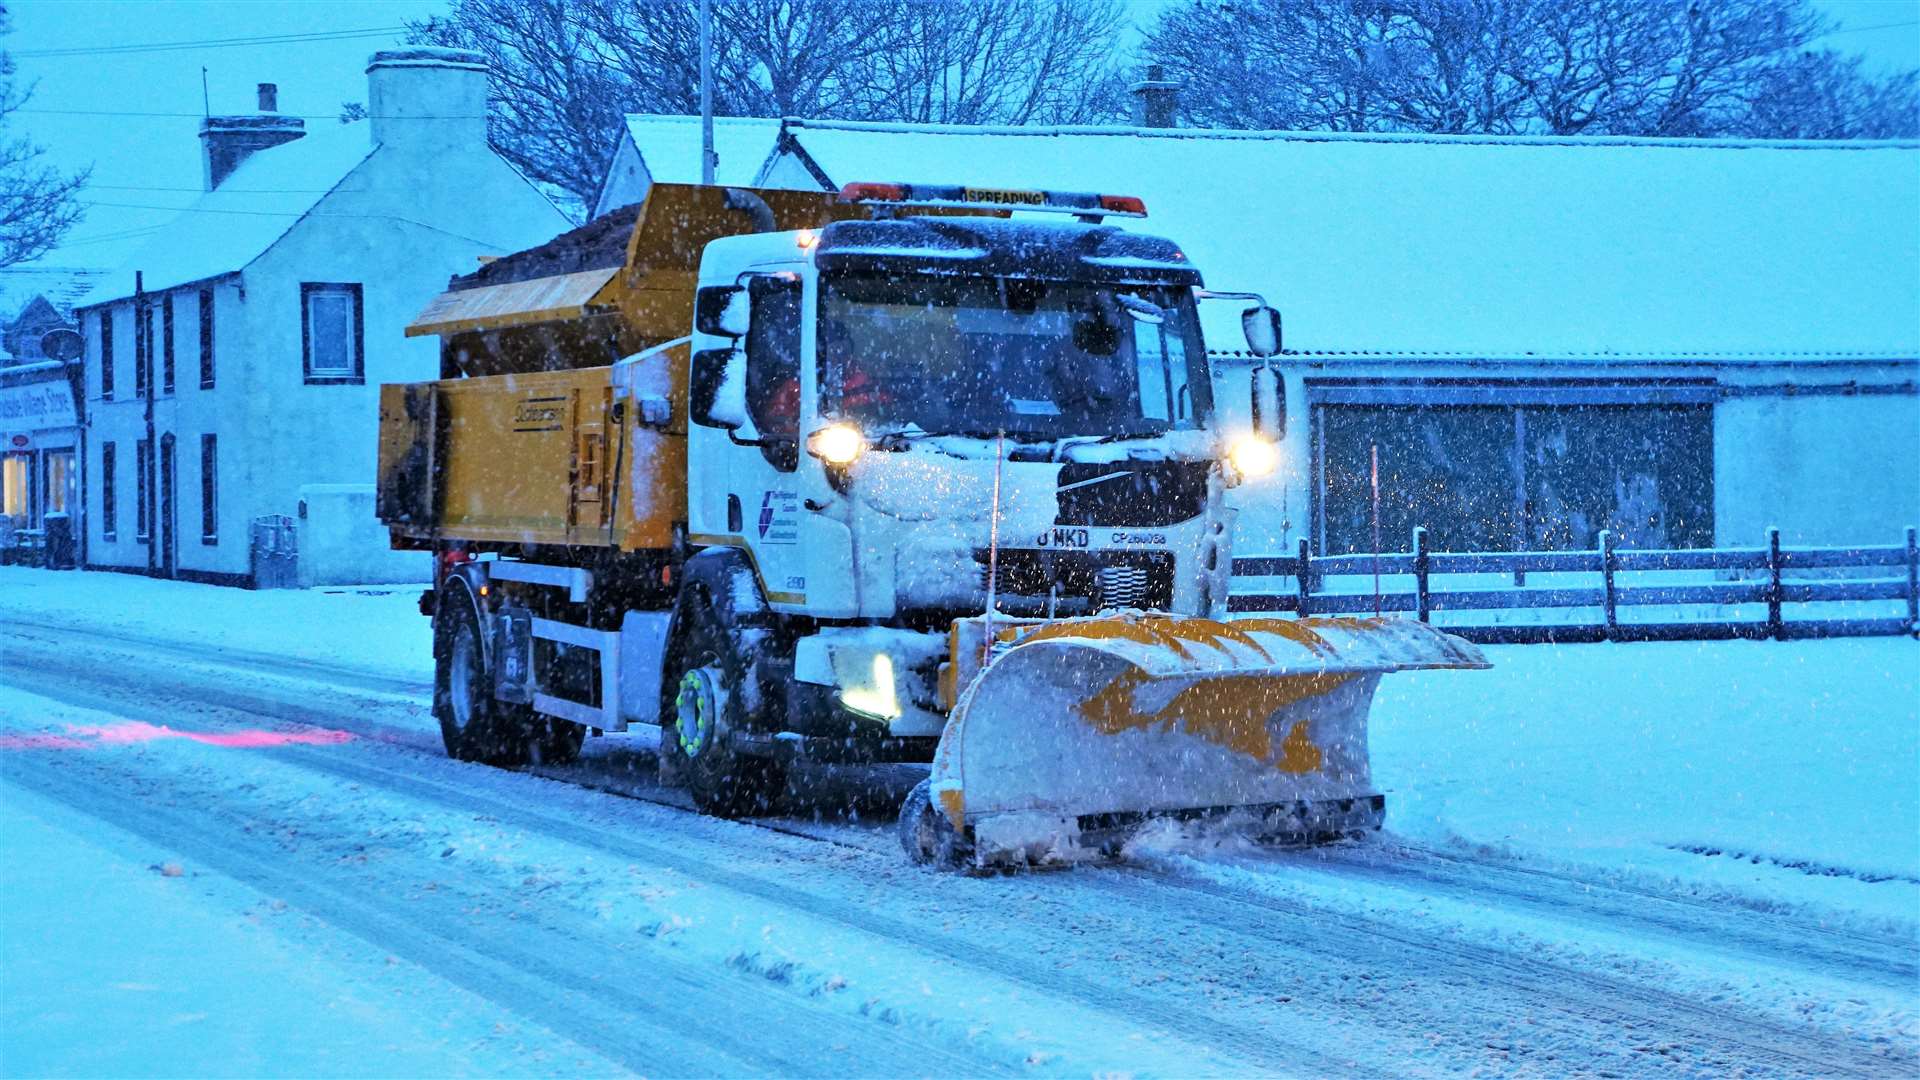 Snow plough in Watten. Cllr Gunn thanked the local road teams for keeping the roads clear. Picture: DGS